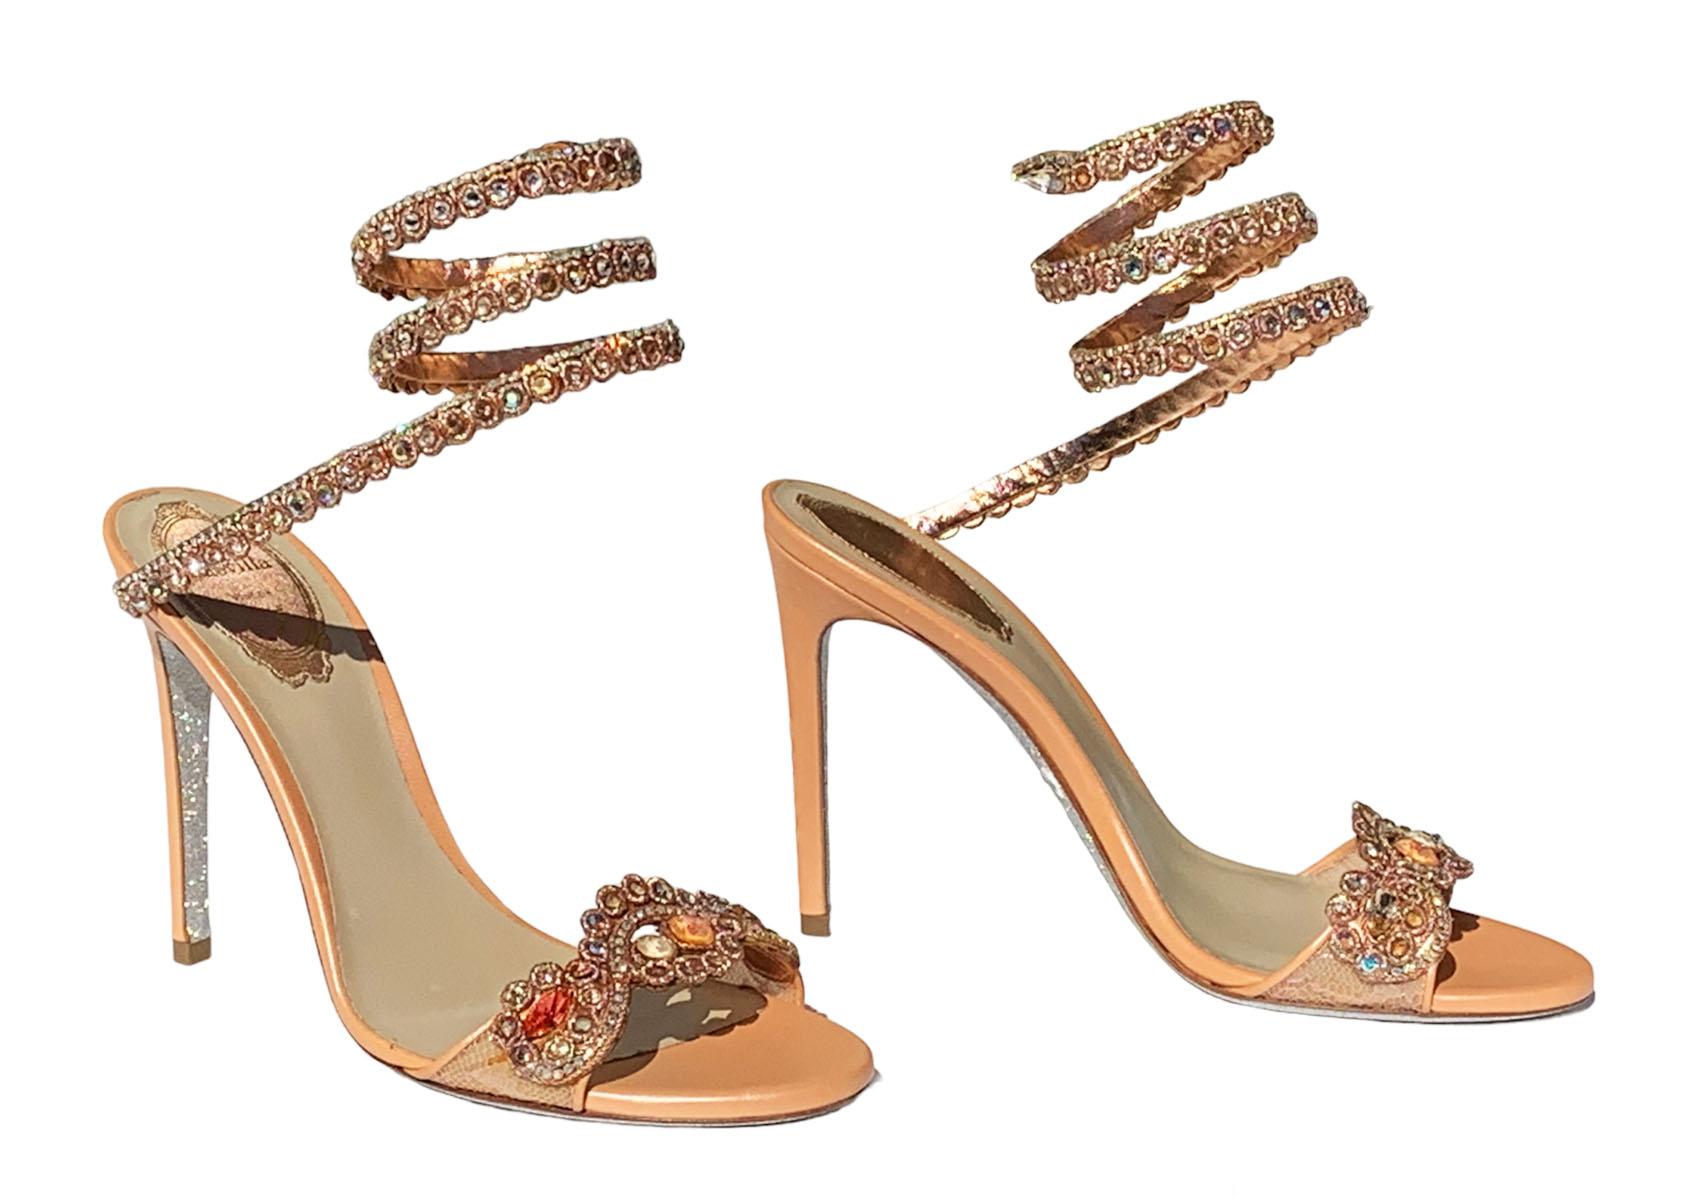 New Rene Caovilla Crystal Embellished Leather Shoes Sandals
Italian size - 38
Signature snake coil corkscrew wraparound ankle strap. Peach color. Colorful crystal embellishment. 
4.3